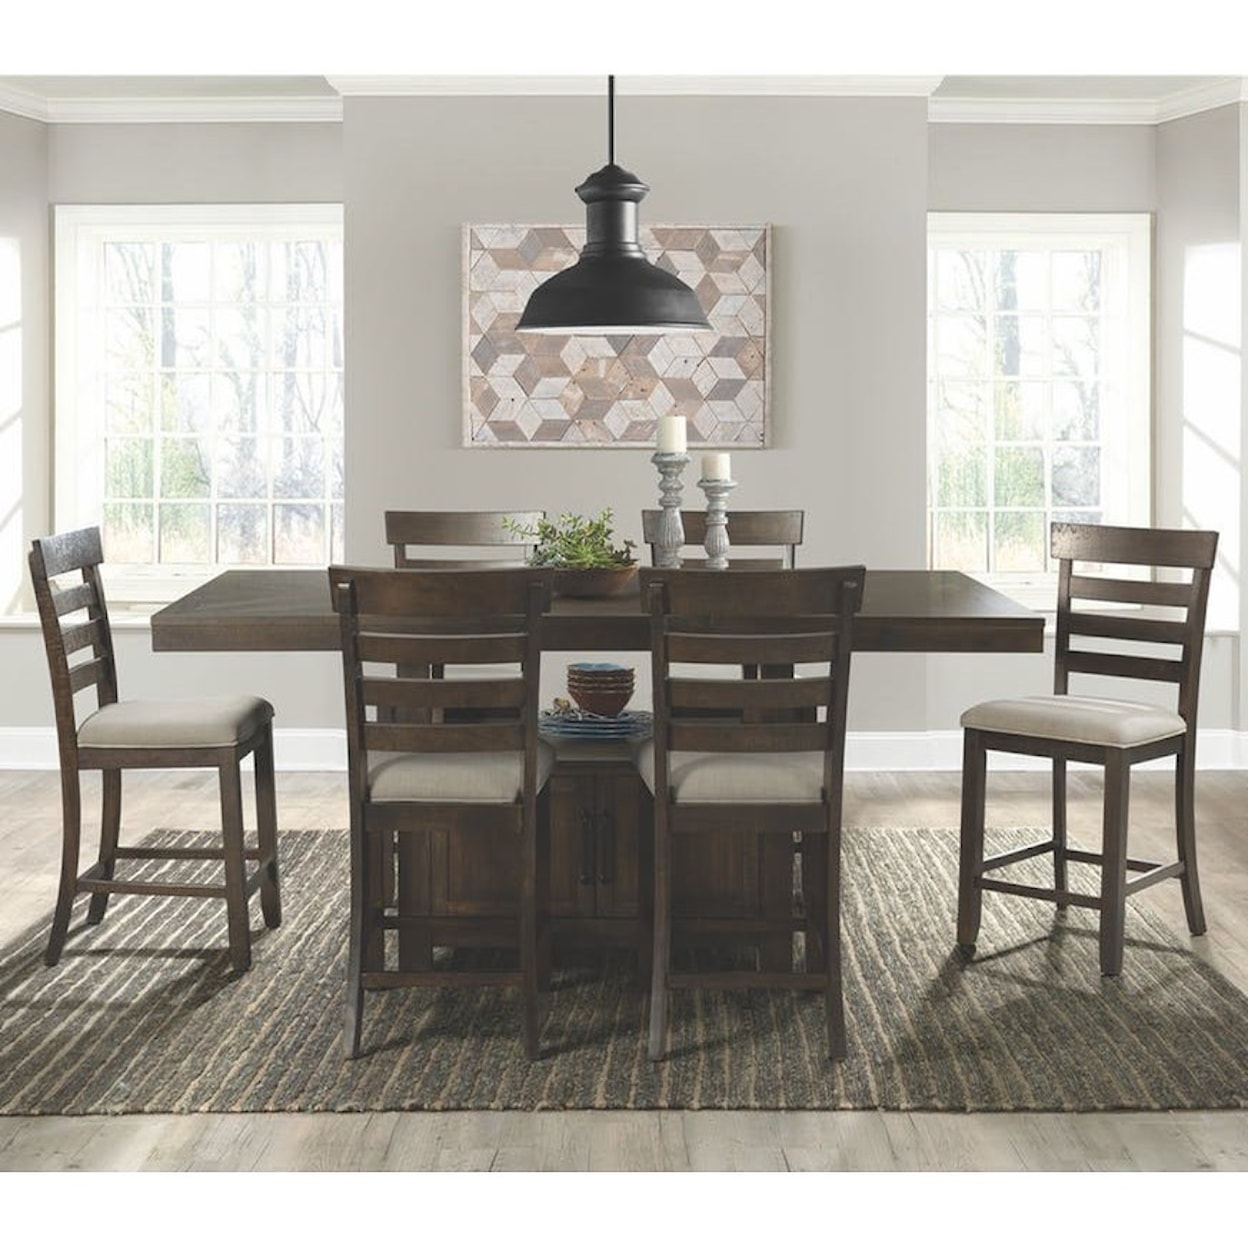 Elements International Colorado Counter Height Dining Set